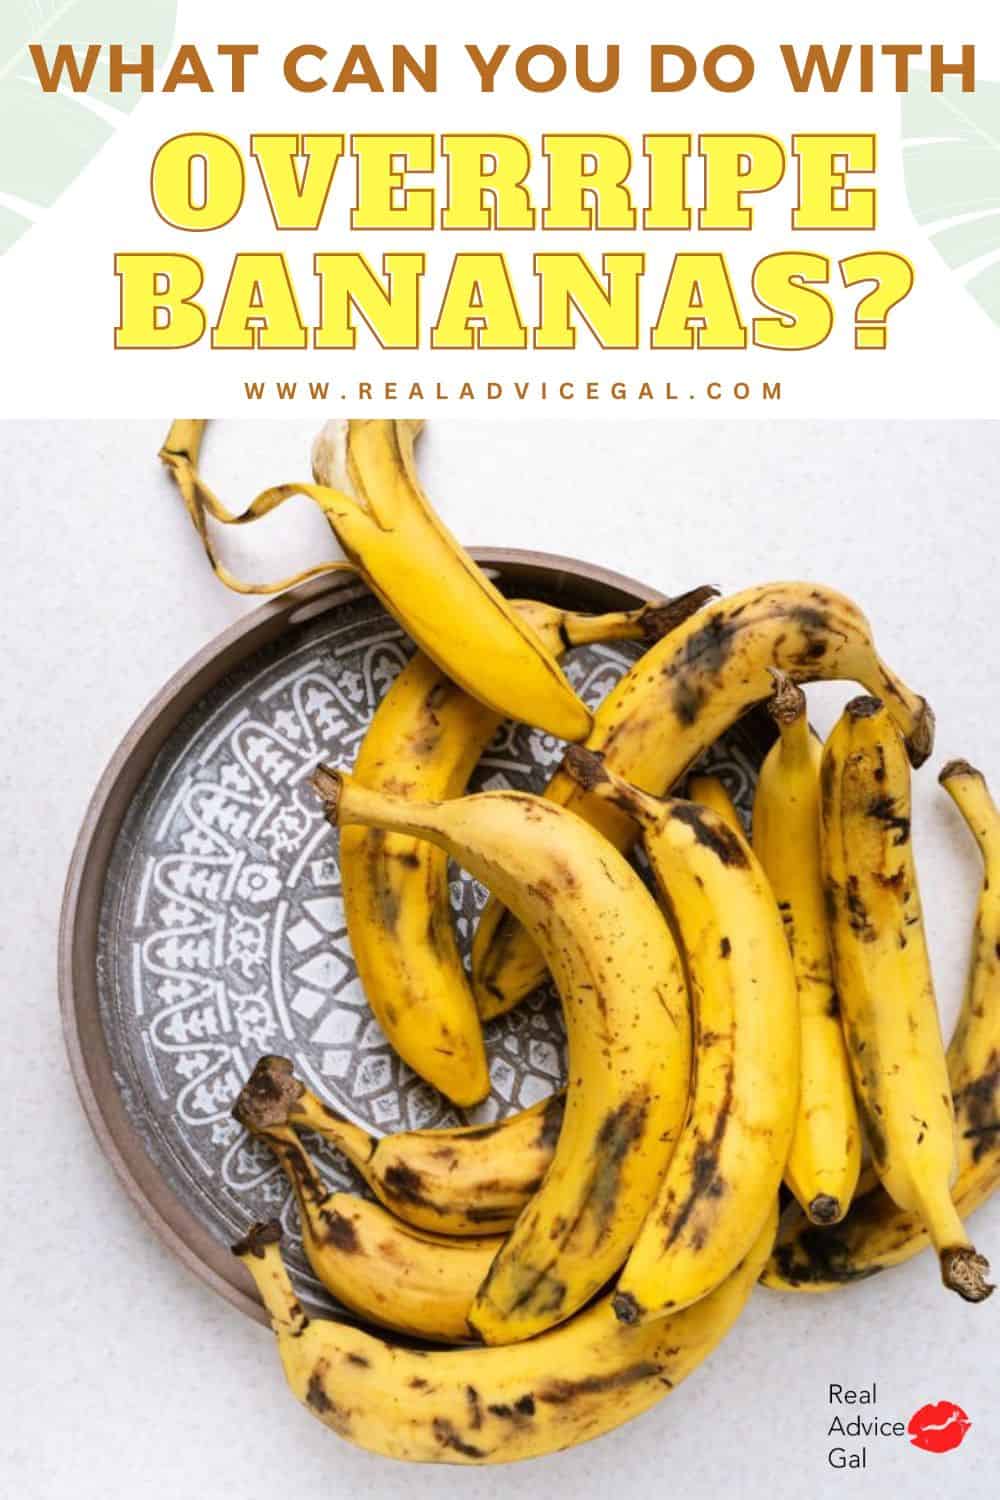 What can you do with overripe bananas?